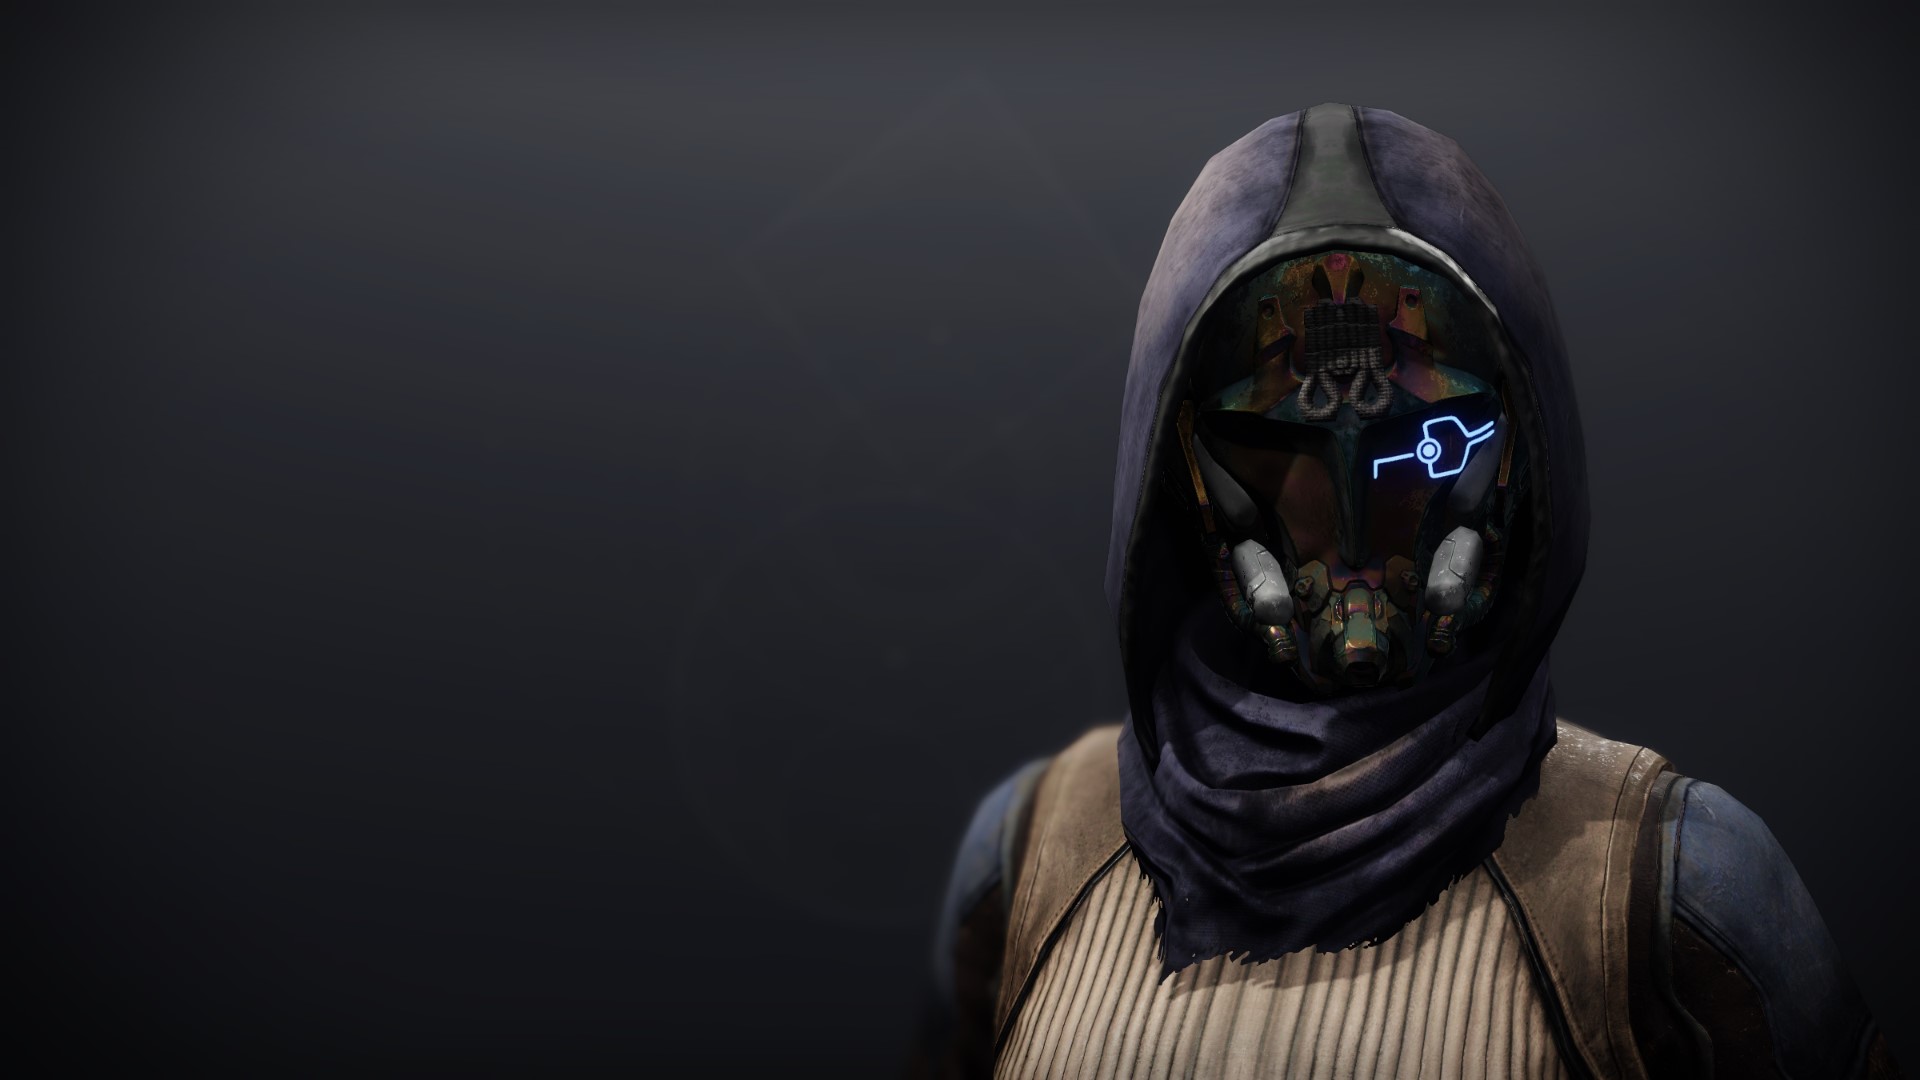 An in-game render of the Ketchkiller's Mask.